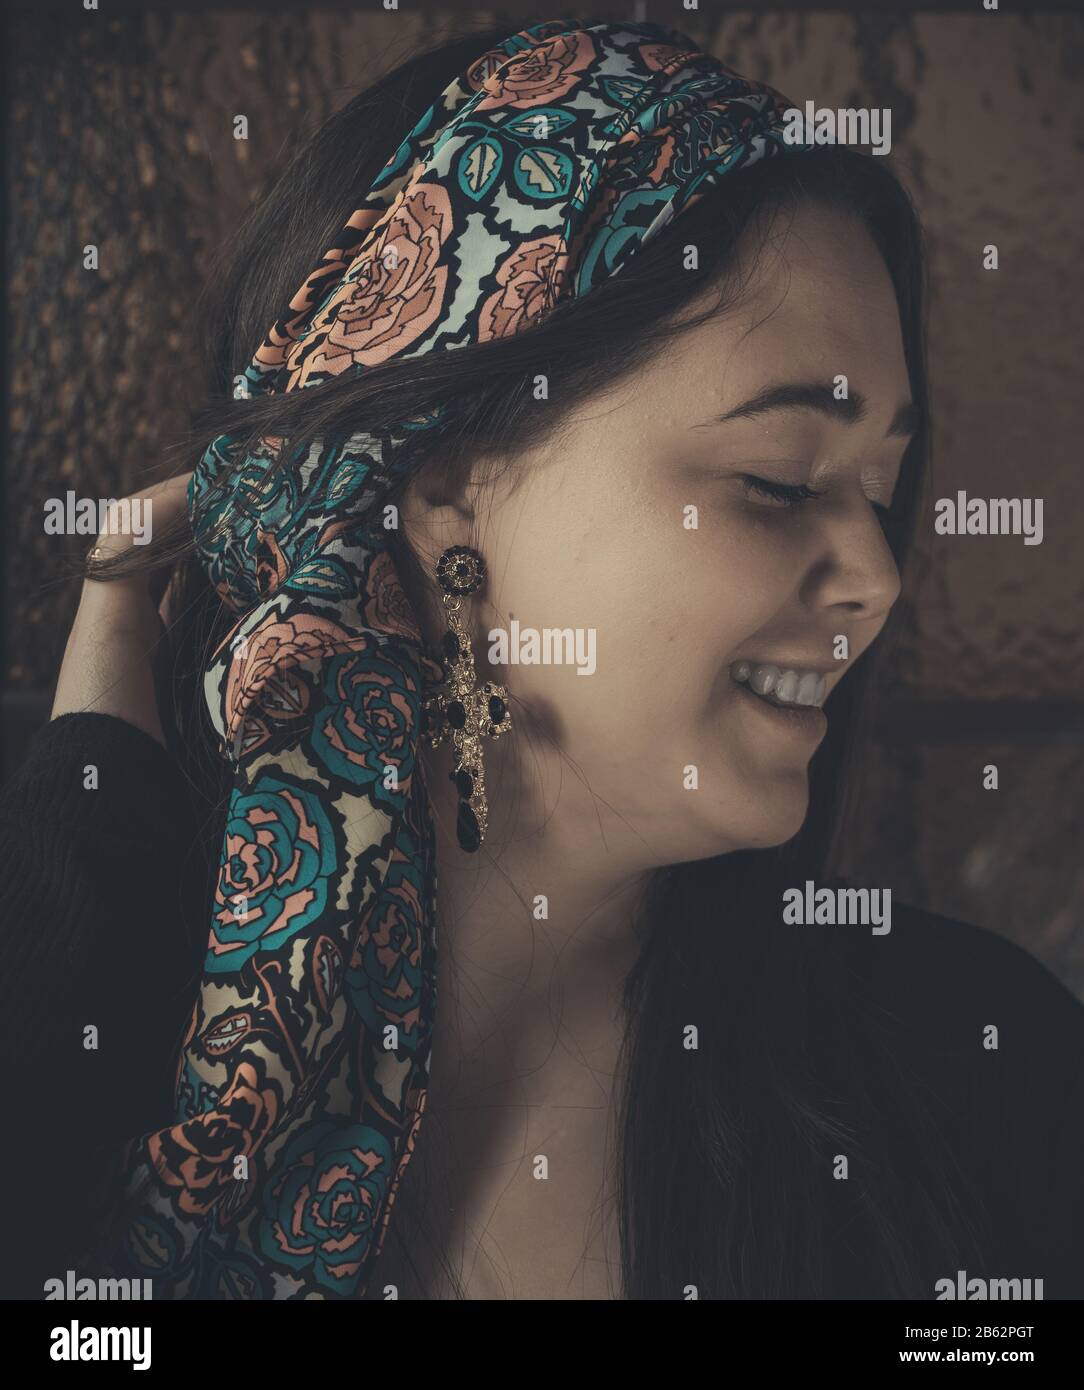 Young woman laughing with eyes closed. Stock Photo